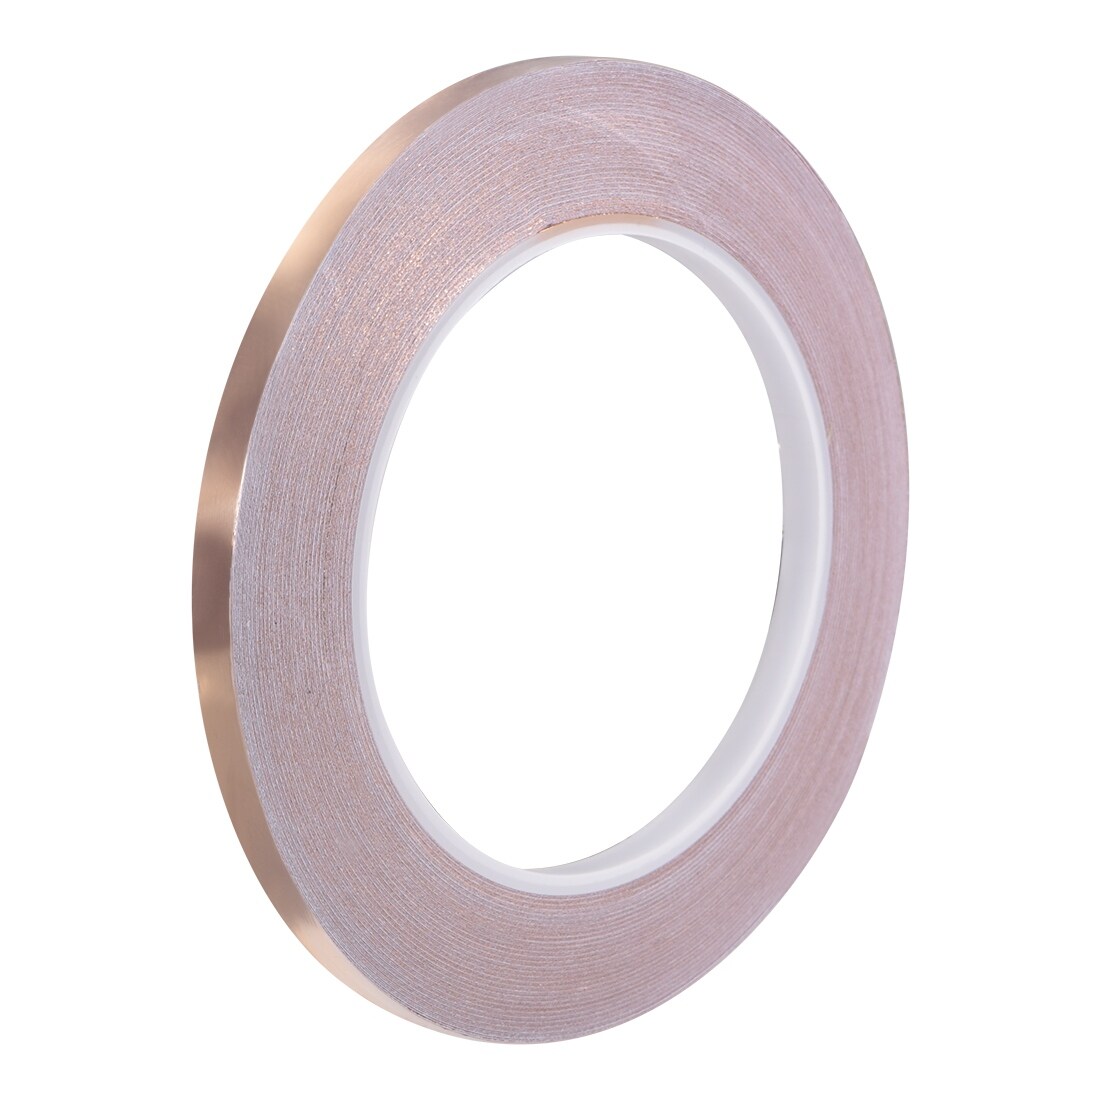 Double Sided Conductive Tape Copper Foil Tape 10mm x 20m/65.6ft